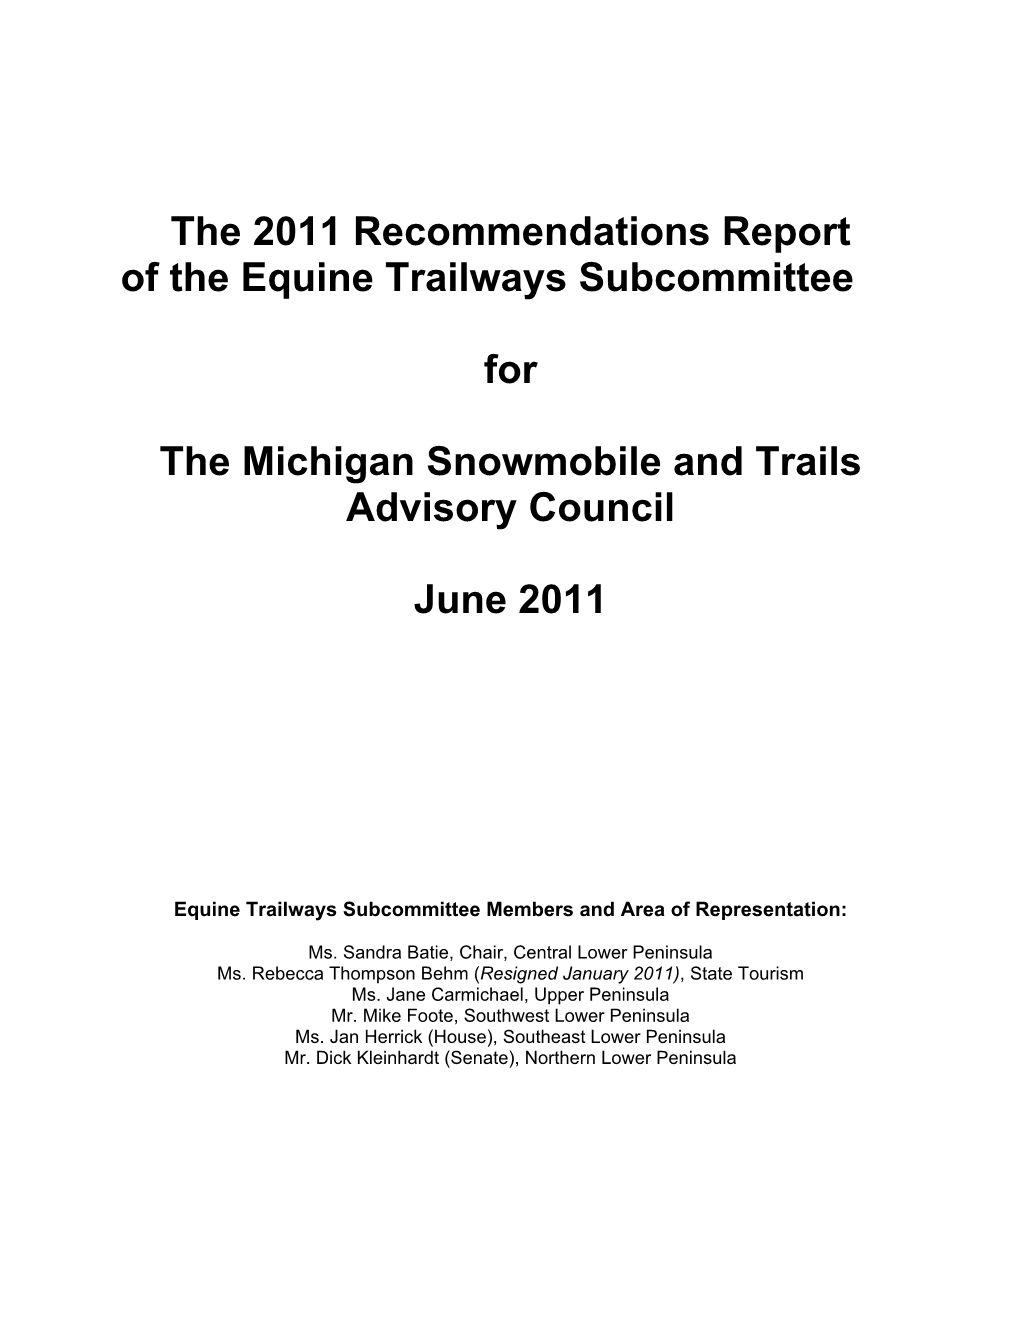 The 2011 Recommendations Report of the Equine Trailways Subcommittee